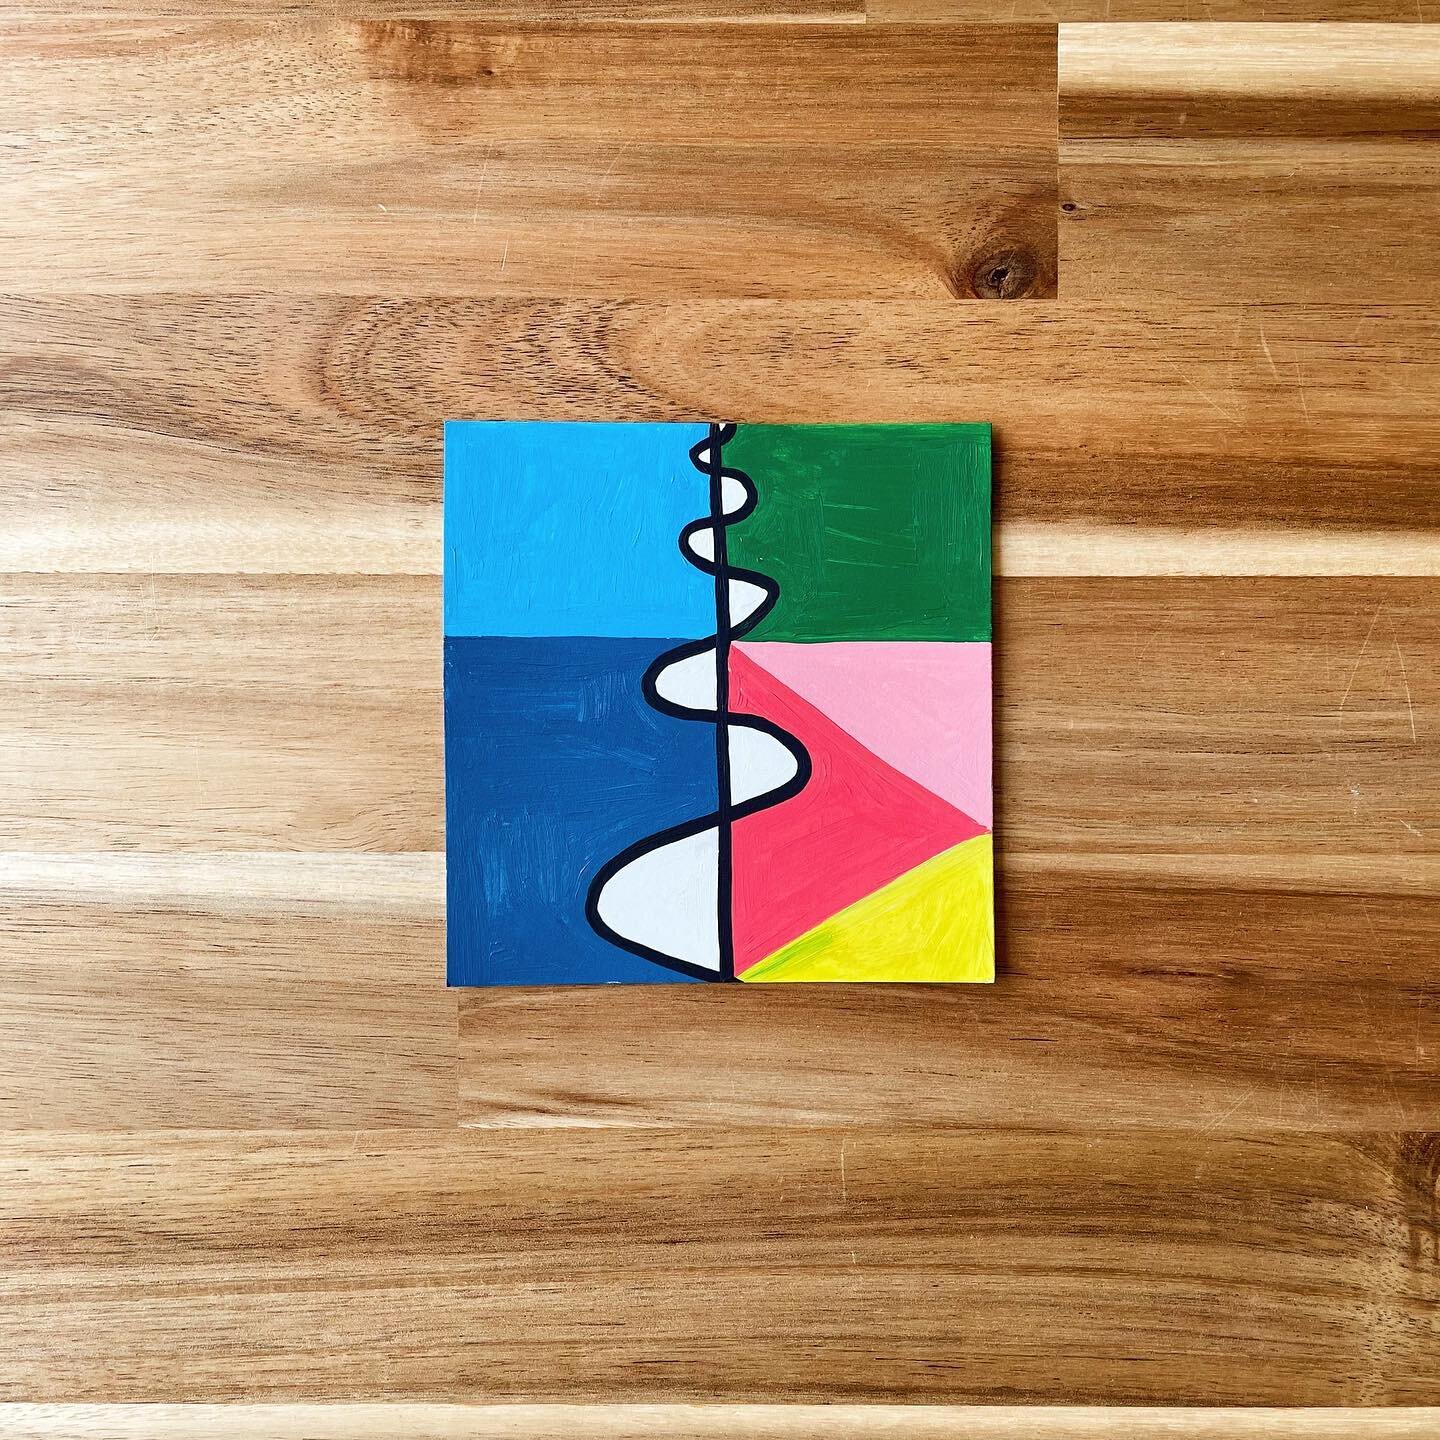 (88/100) Album &ldquo;Overseas&rdquo; by @evergreen_sound🔥 Painted with acrylic on 4&rdquo; x 4&rdquo; paper for my #100albumswithlaura project 🌈

Fave song &ldquo;Gemini&rdquo; is perfect for eating ice cream to 🥰

Scroll to see the original 🤍 C